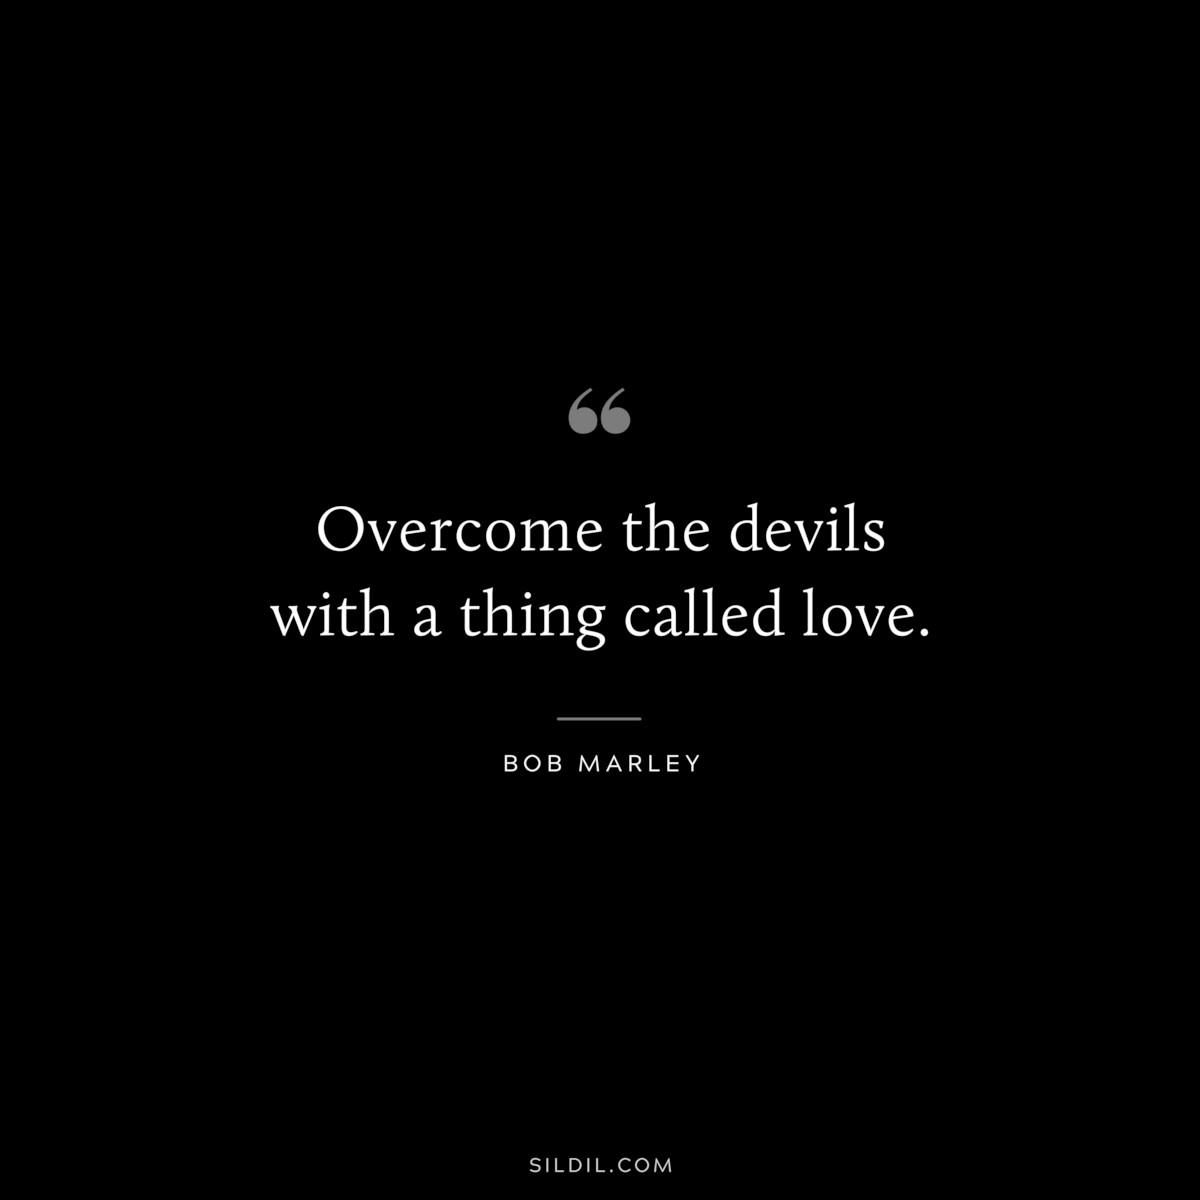 Overcome the devils with a thing called love. ― Bob Marley